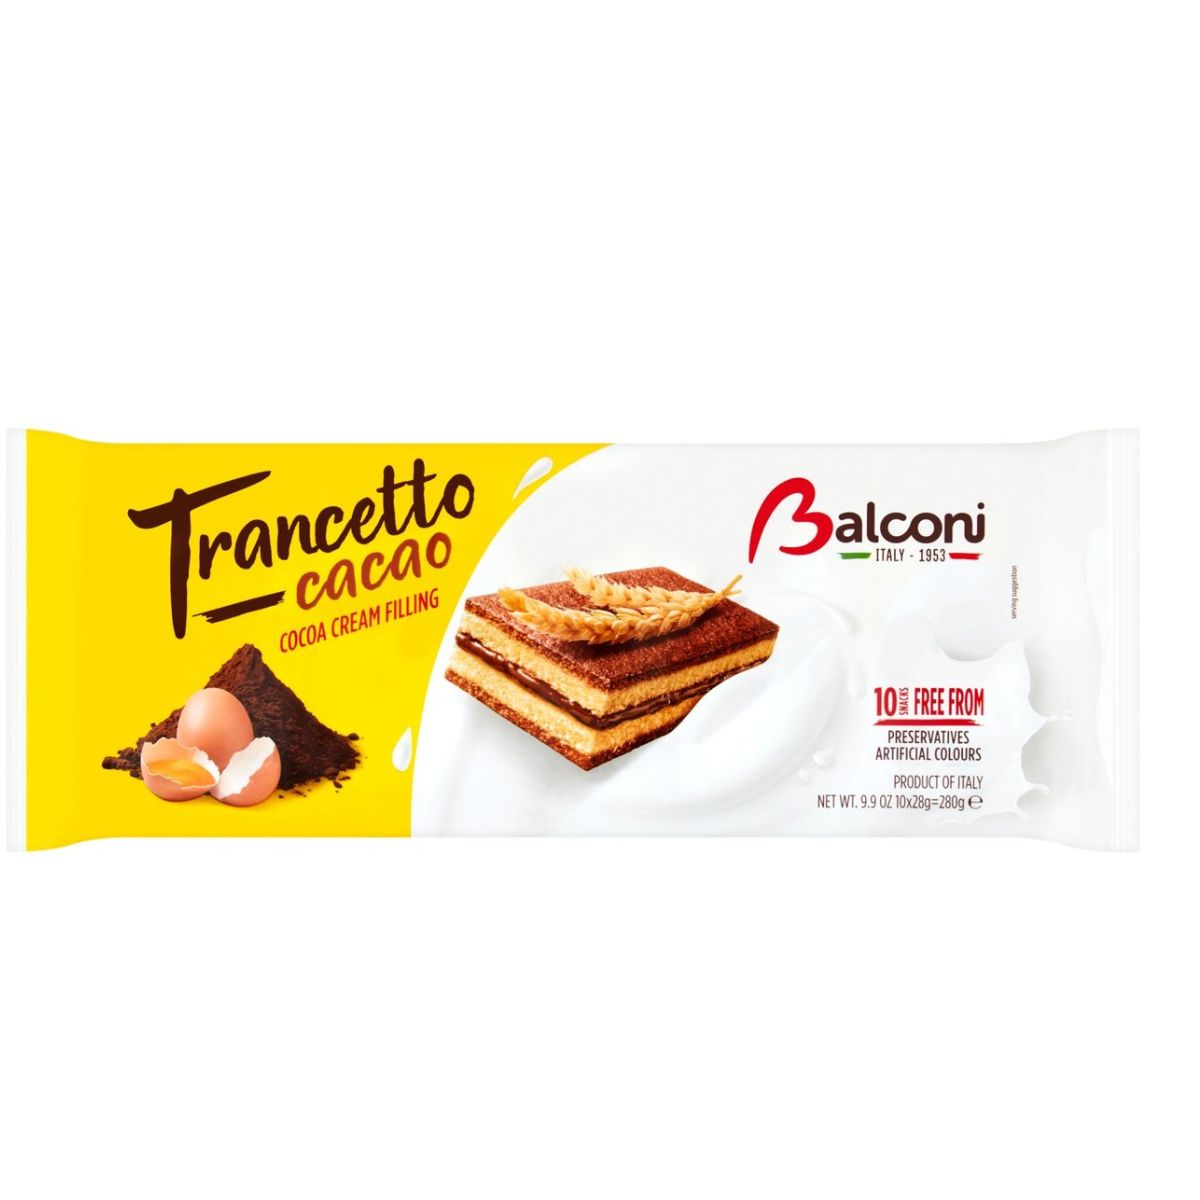 Taste the delectable Balconi - 10 Trancetto Cocoa Sliced Cake Bars - 280g filled with rich cocoa cream. Indulge in the irresistibly delicious Sacramento 125g treat.